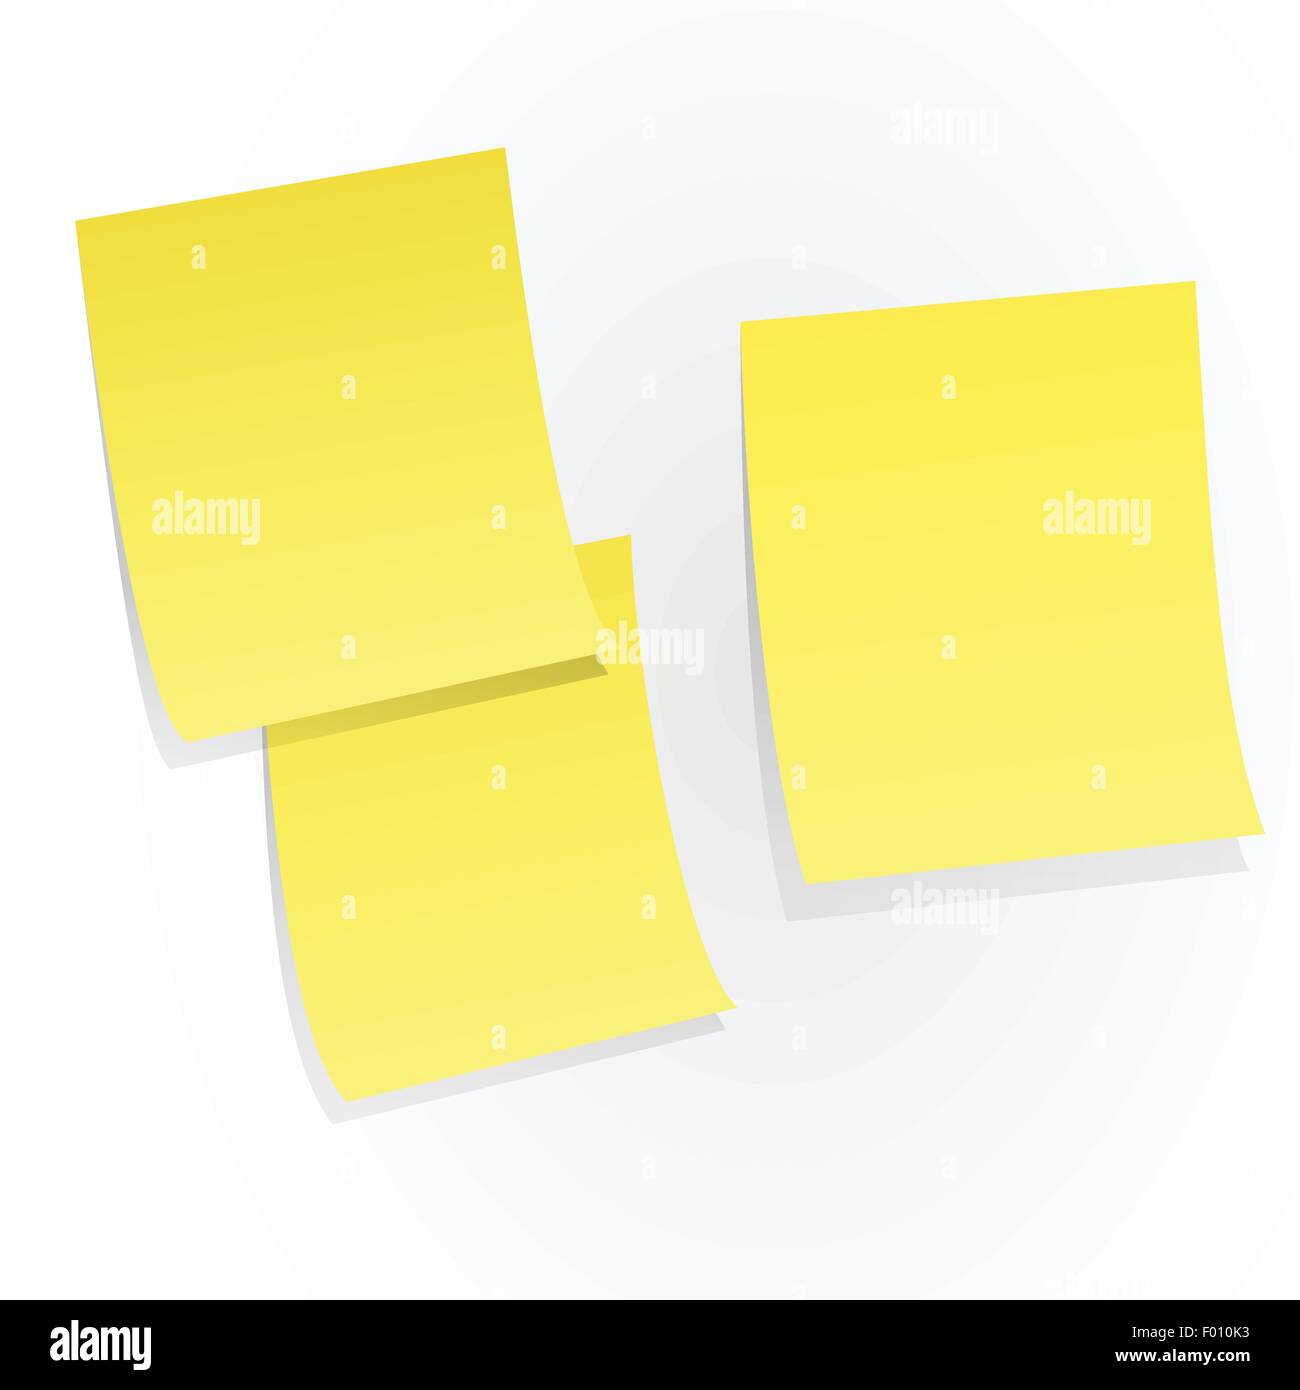 Royalty-Free photo: White printer paper, yellow sticky note and